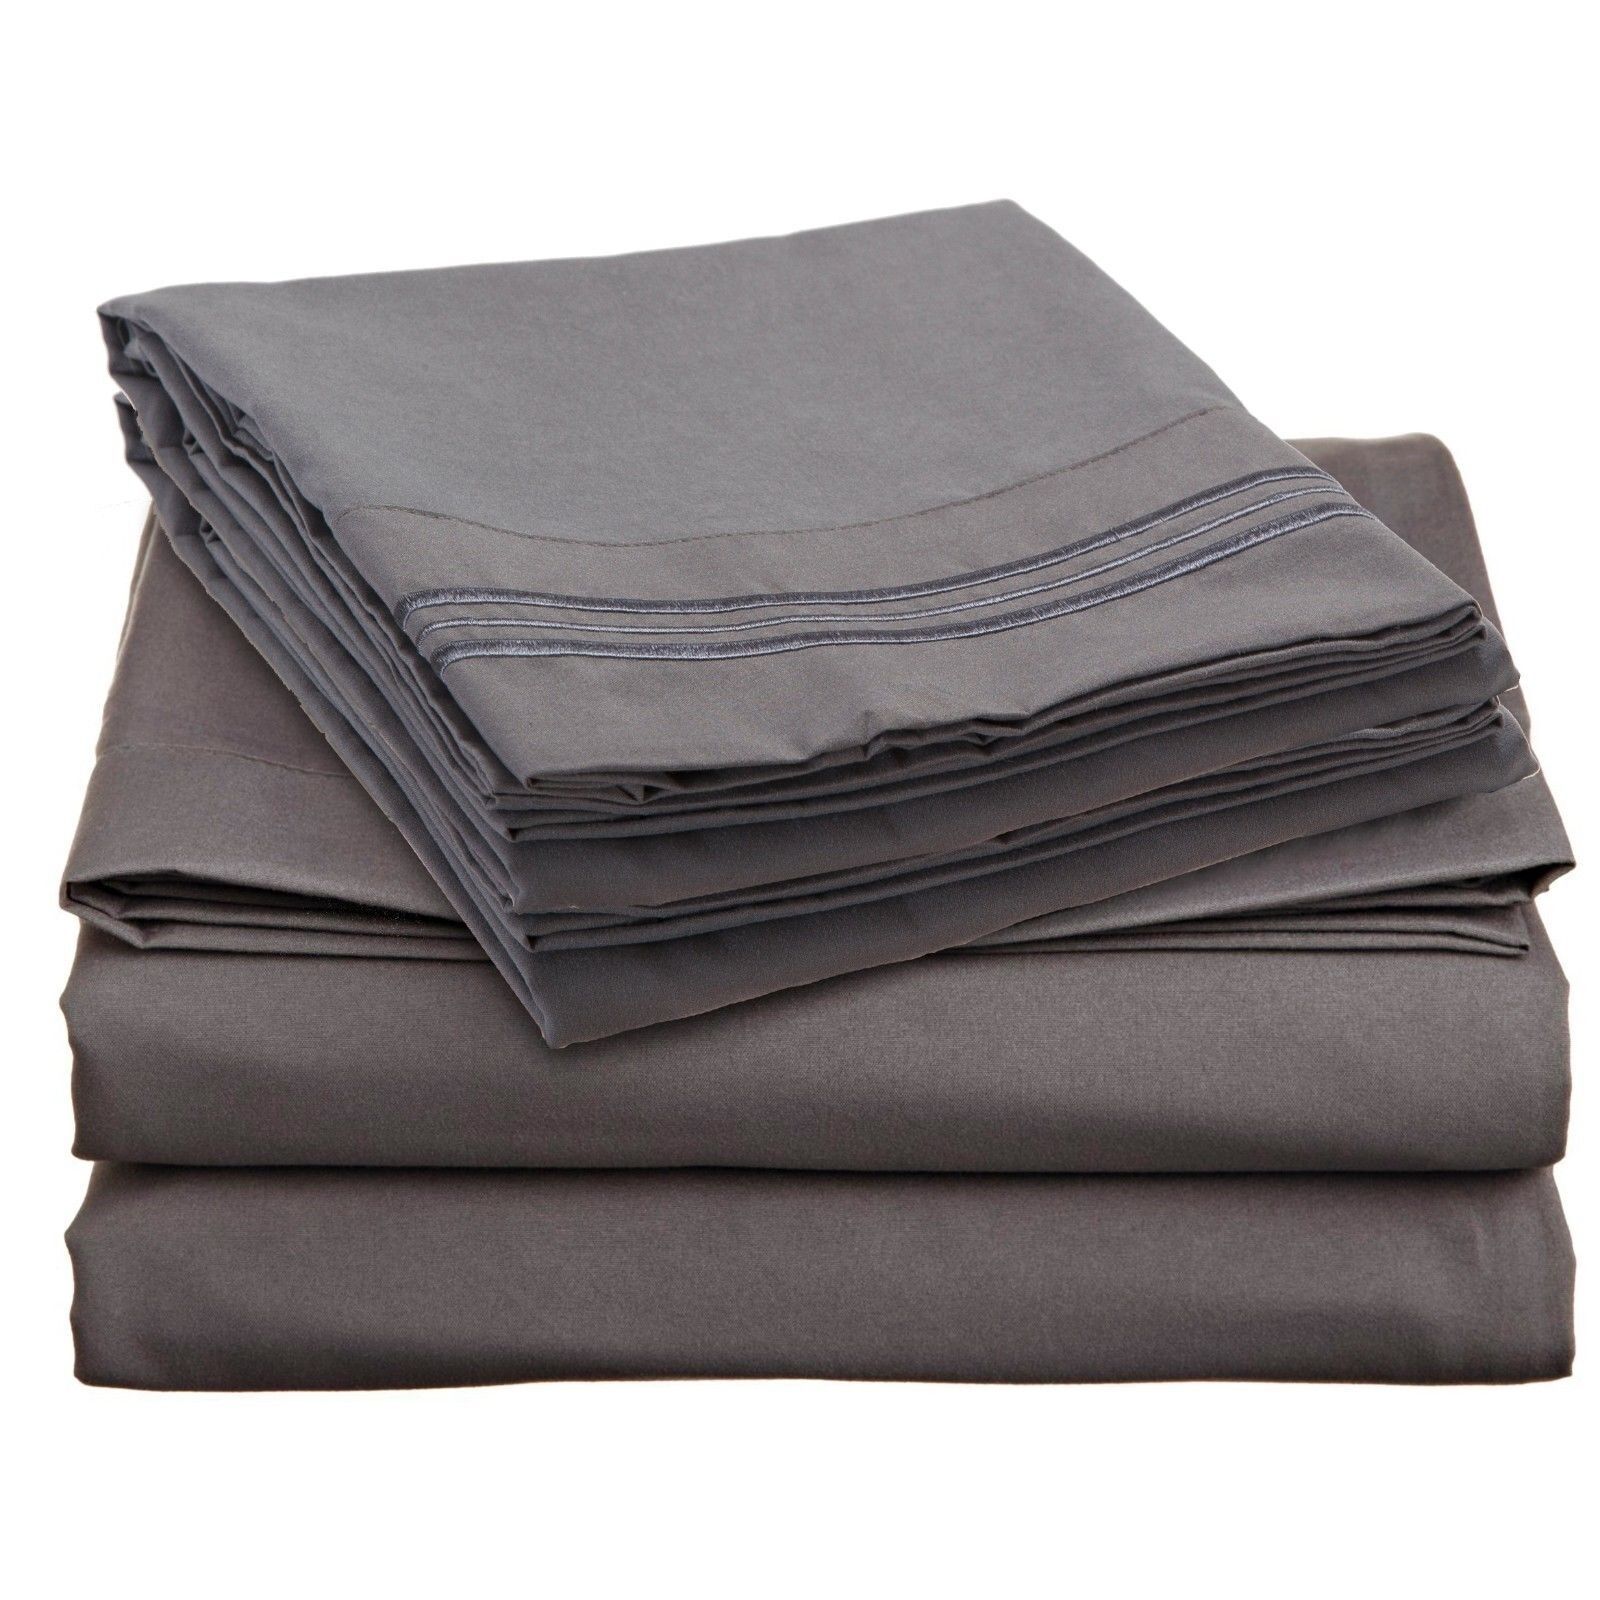 Bed Sheets - Deep Pocket Bed Sheets- 4 Piece Set, Queen, King, Twin, or Full Size - Twin / Gray